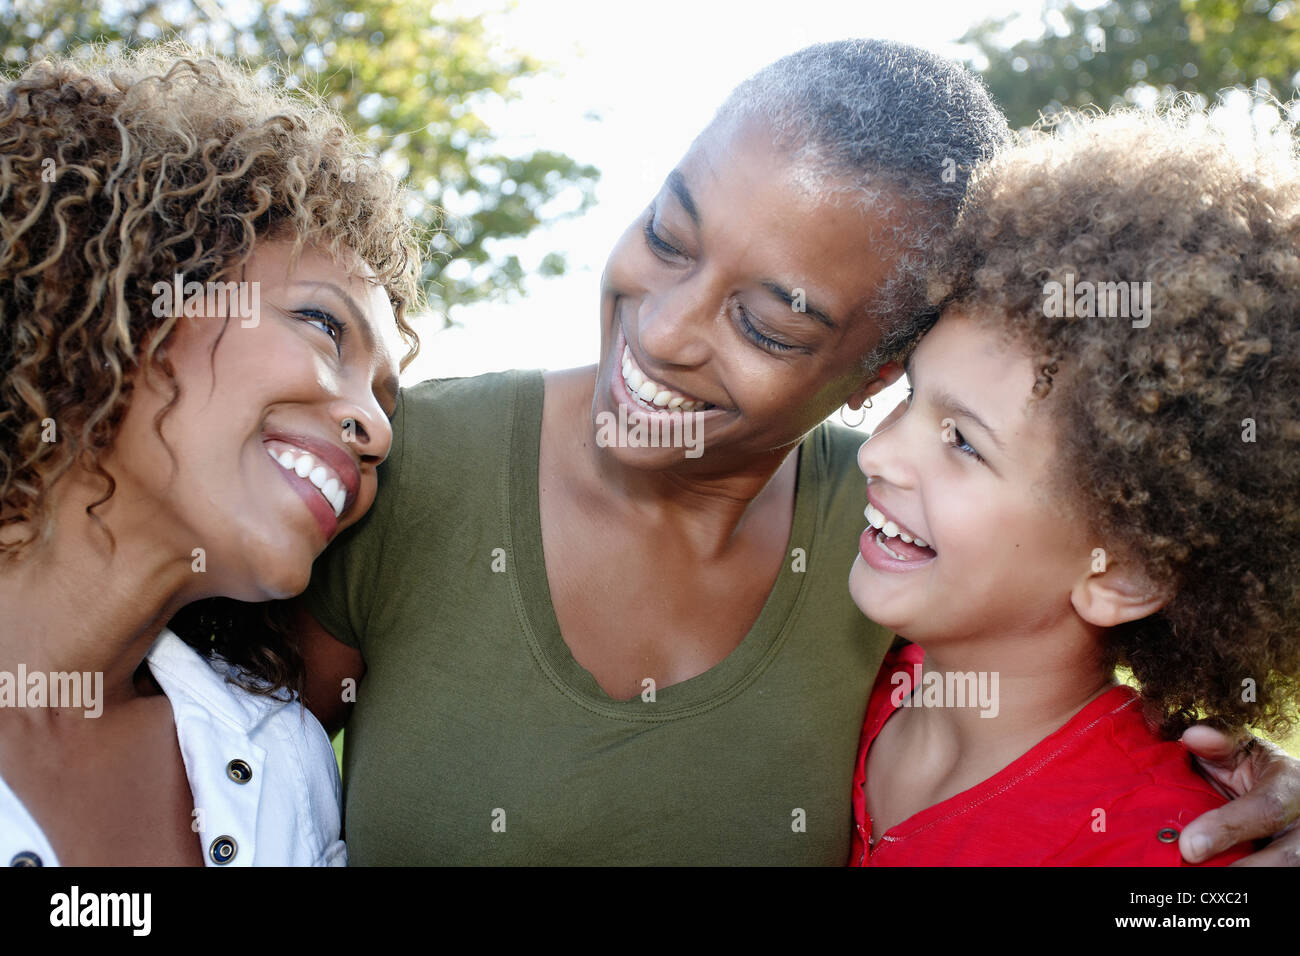 Smiling African American family Banque D'Images